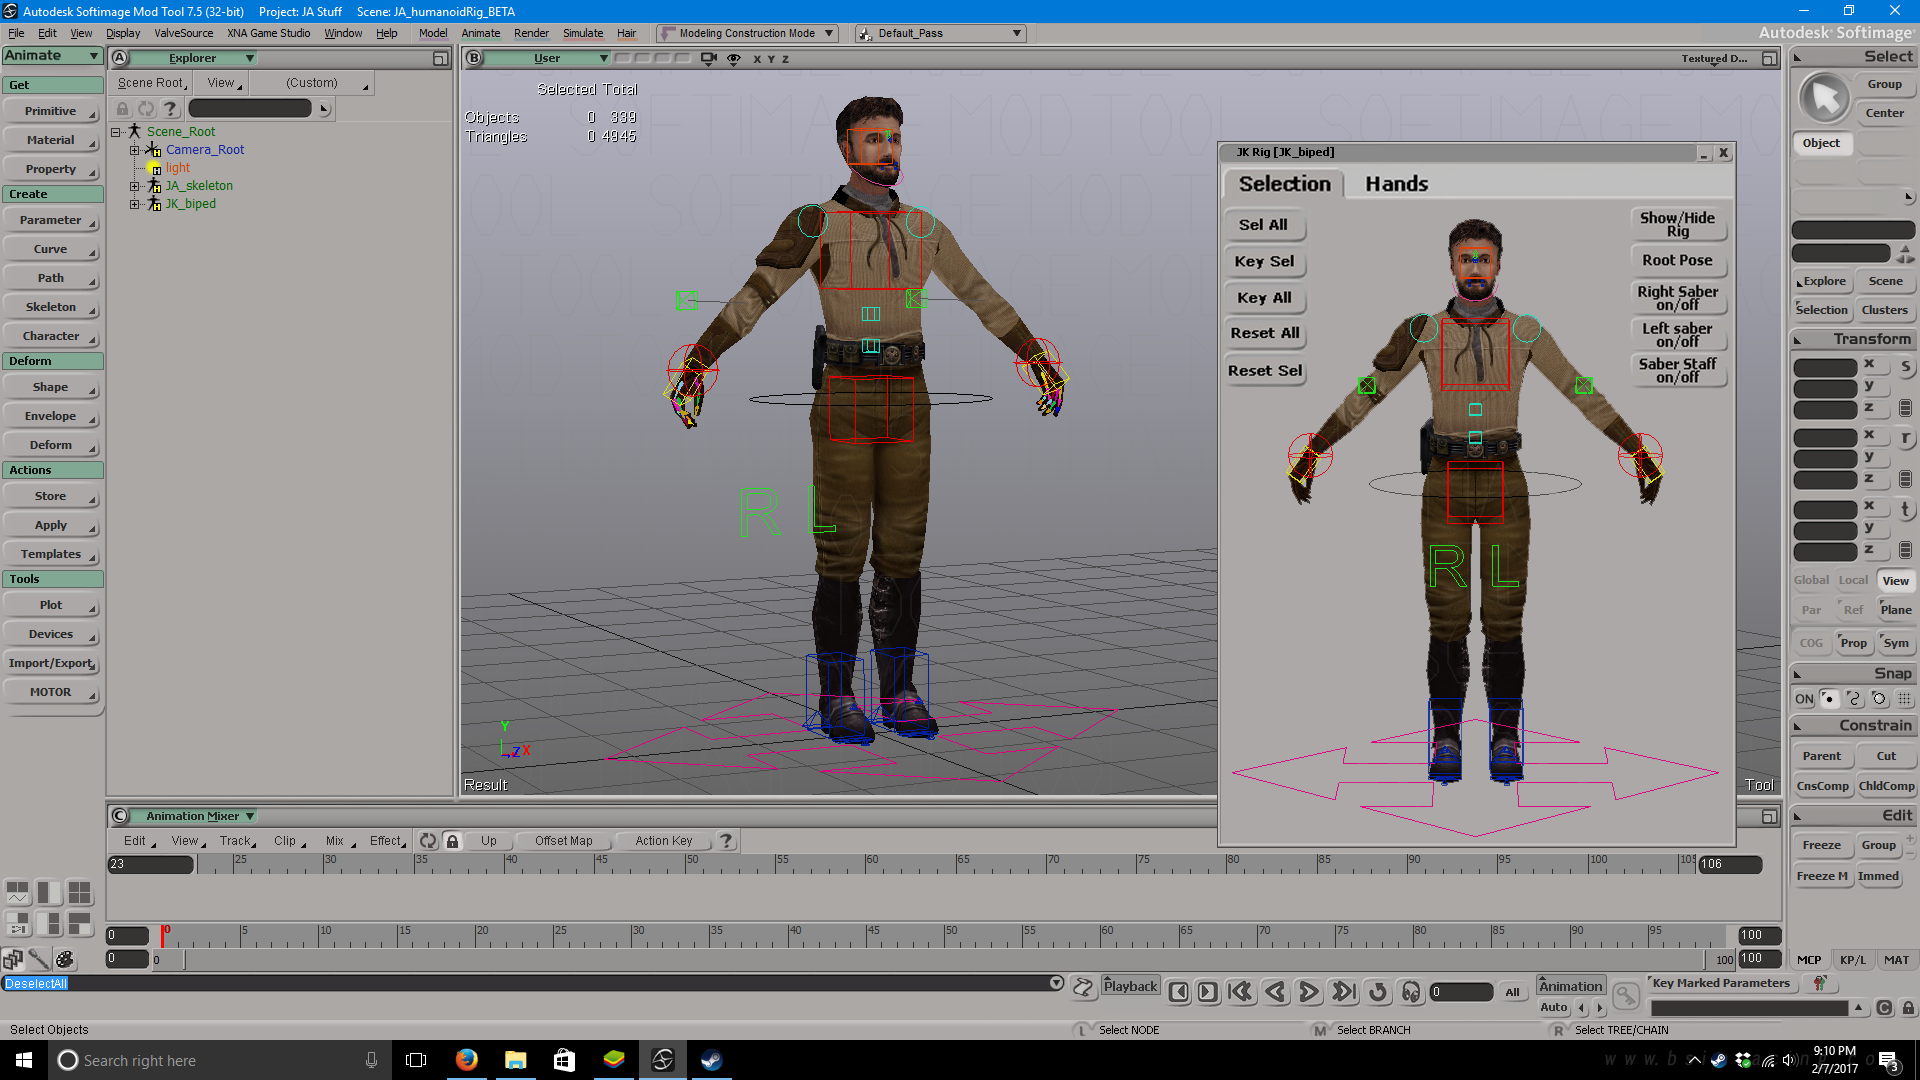 More information about "Jedi Knight Series _humanoid Animation Rig"